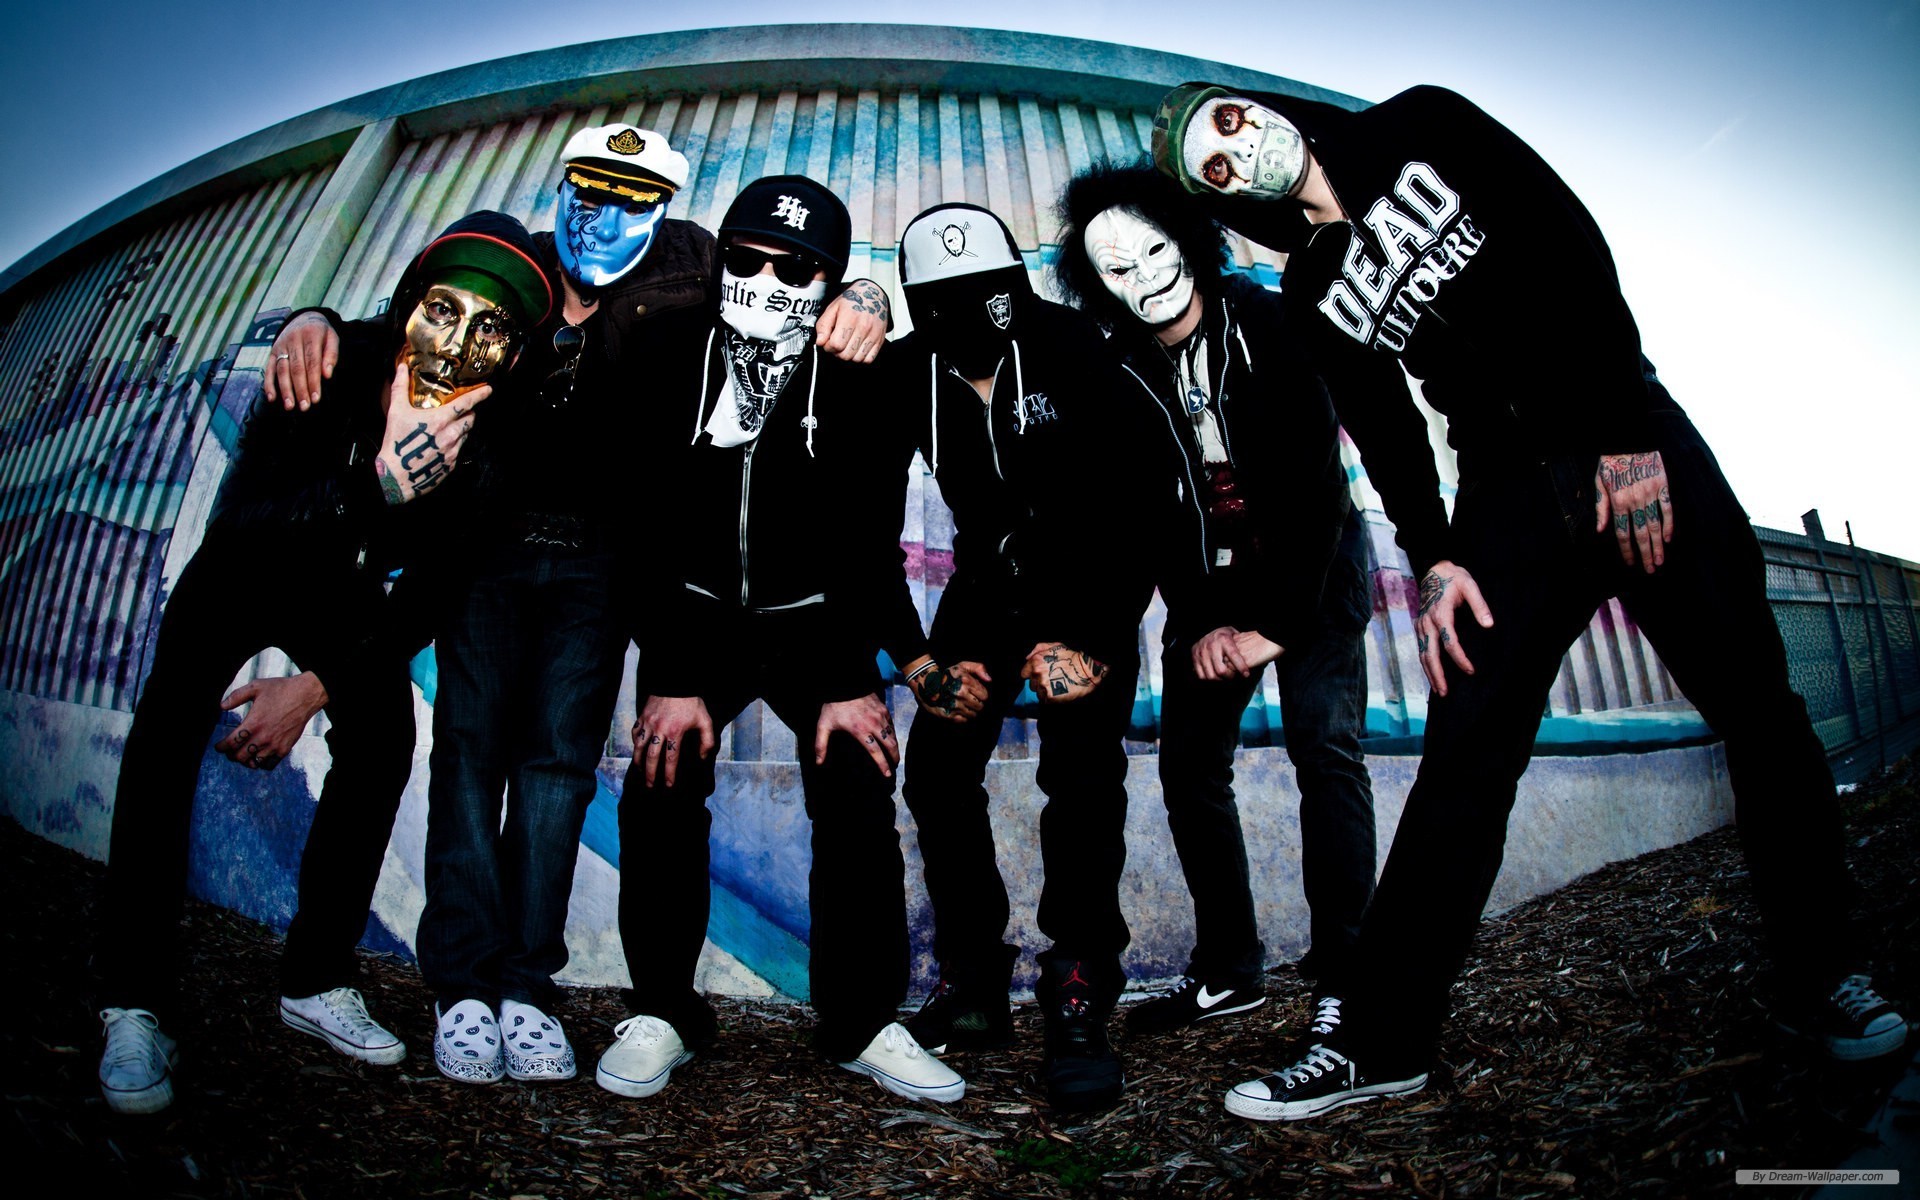 People 1920x1200 Hollywood undead men mask outdoors urban band